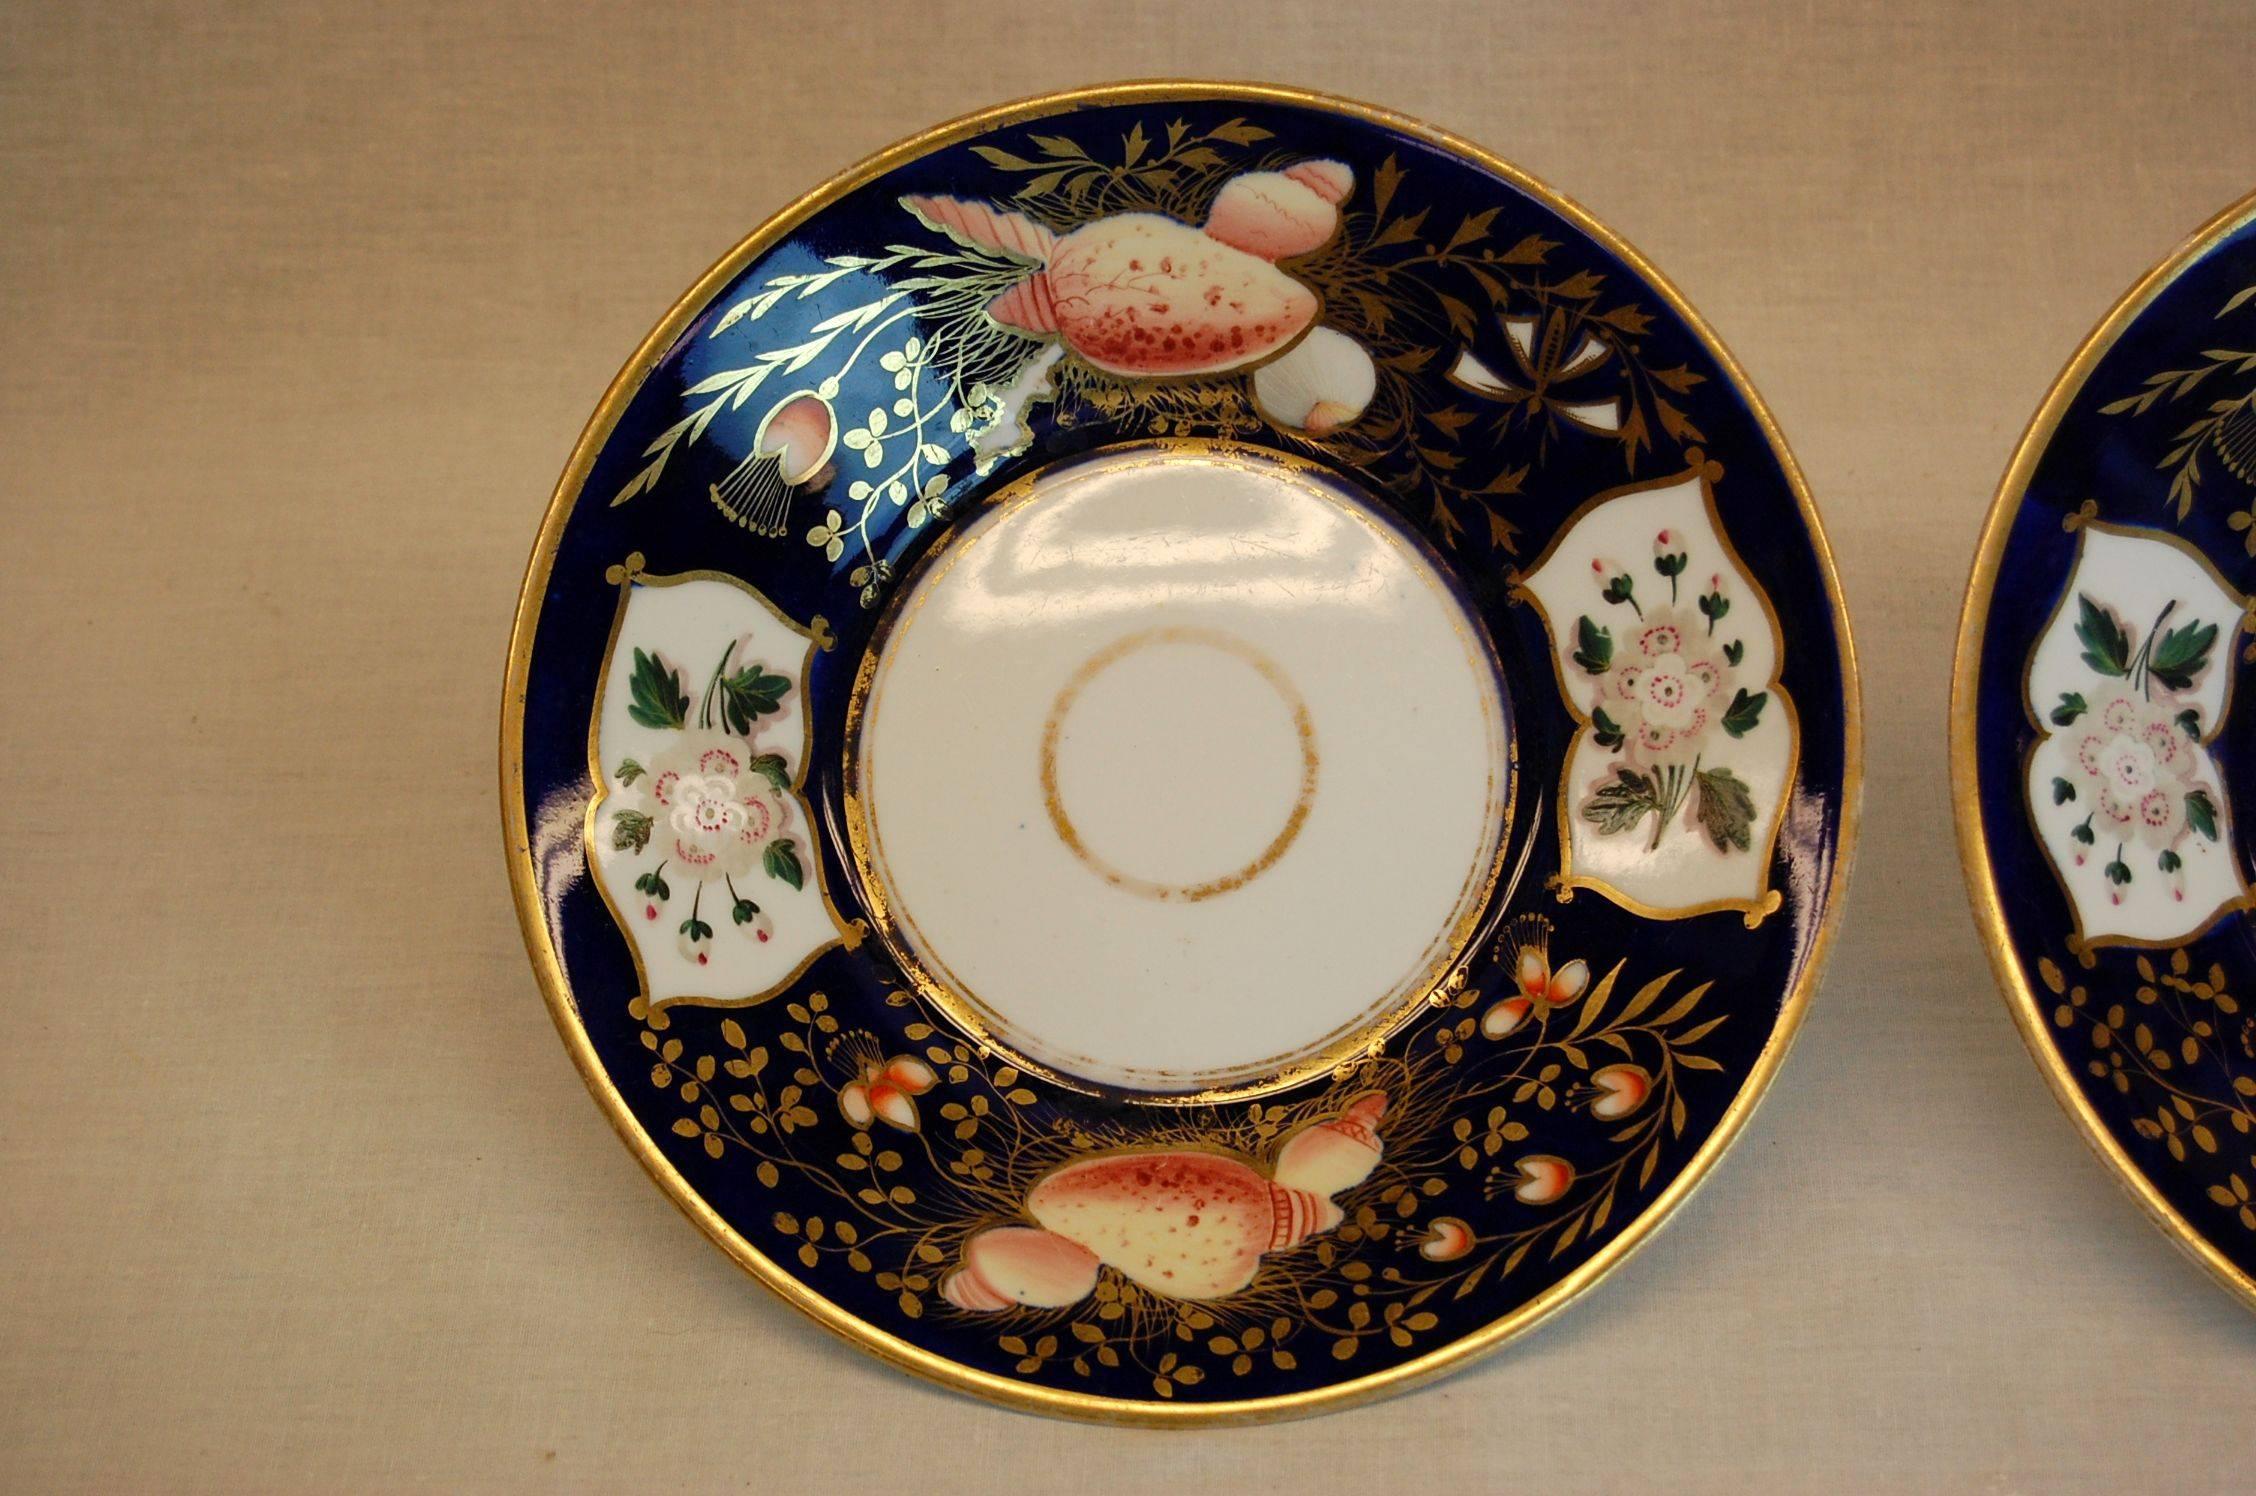 Pair of mint condition plates, possibly Spode, mid-19th century. Seashell and floral designs on cobalt blue background.